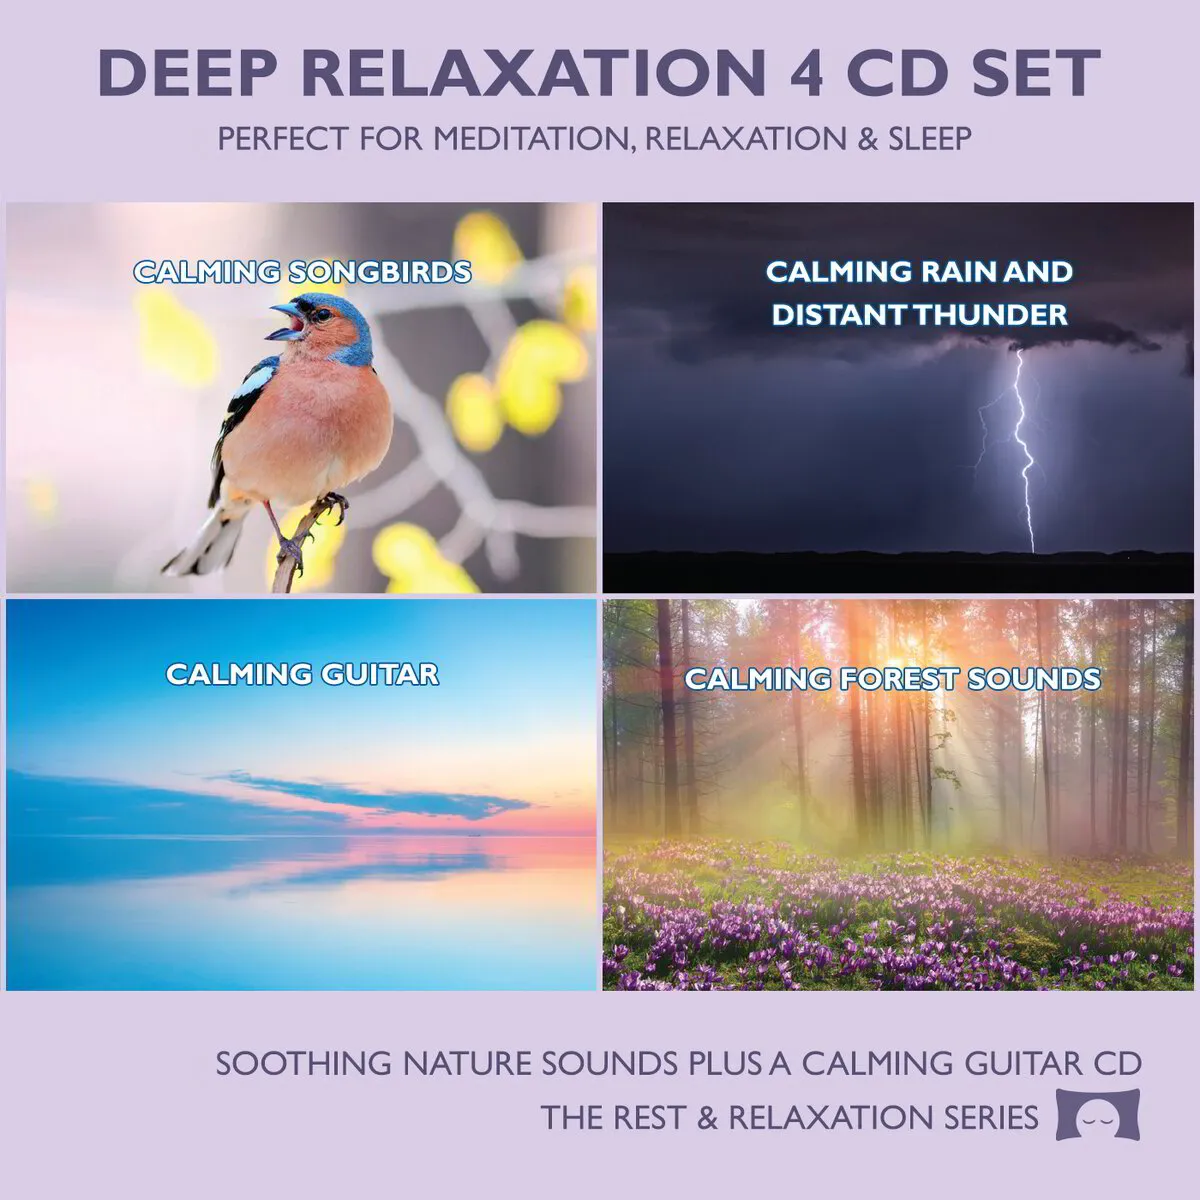 Deep Relaxation 4 CD Set - Soothing Nature Sounds for Meditation - Relaxation and Sleep - Recording - Physical CD